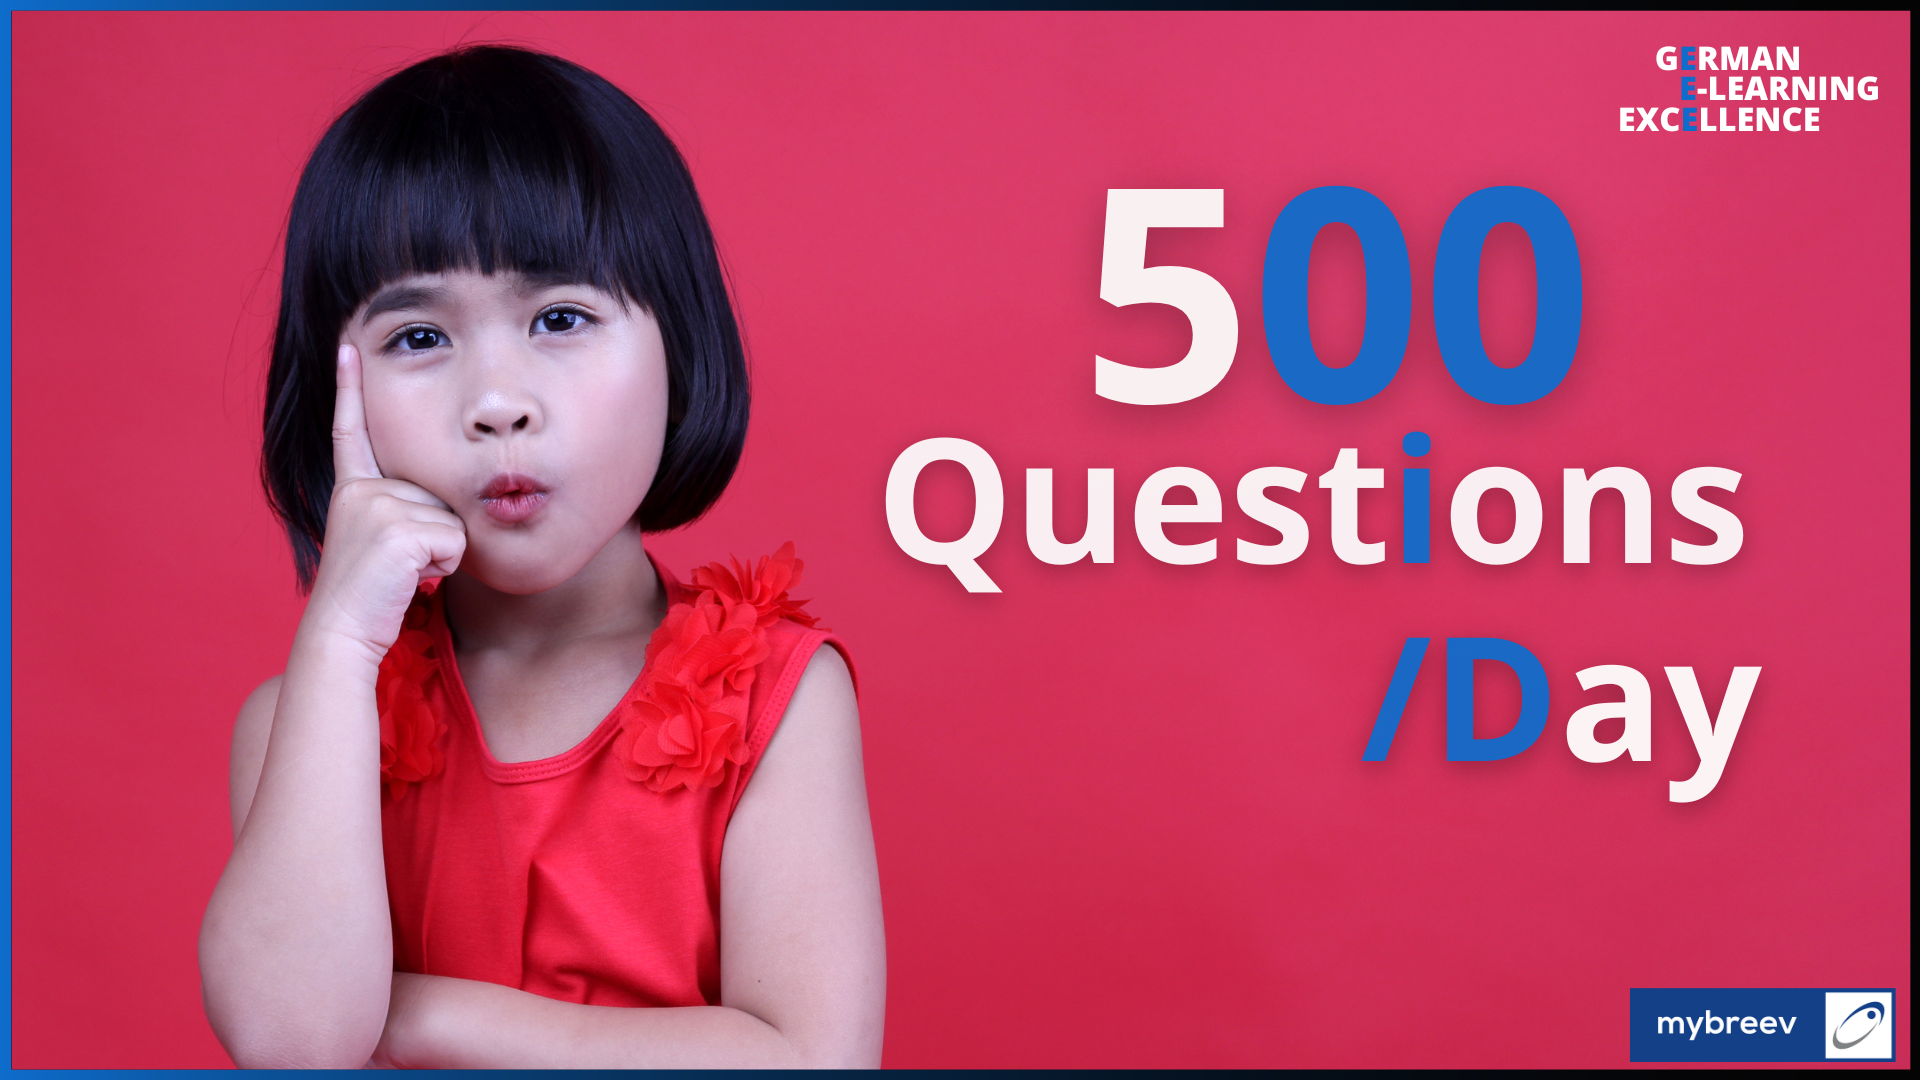 A child asks up to 500 questions a day. And you?